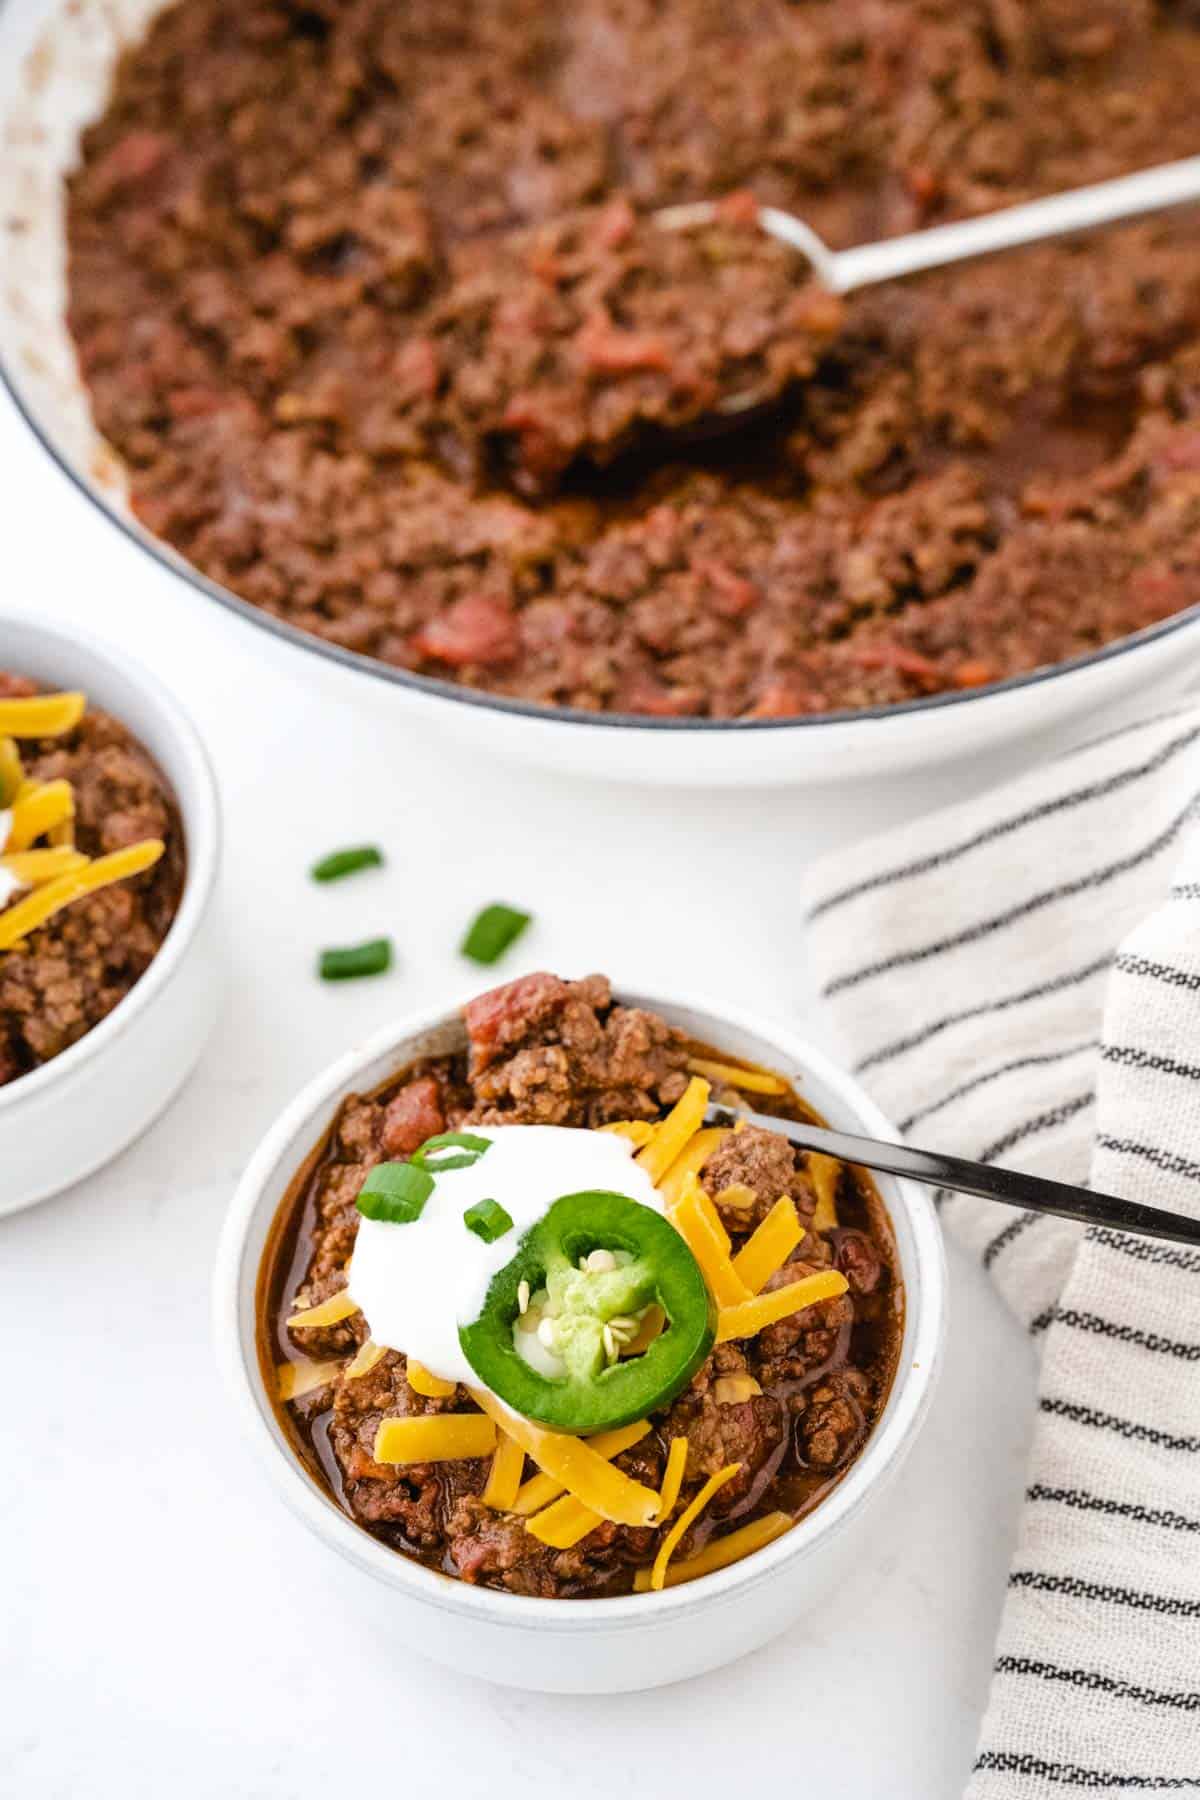 https://www.soulfullymade.com/wp-content/uploads/2023/01/low-carb-keto-chili-43.jpg